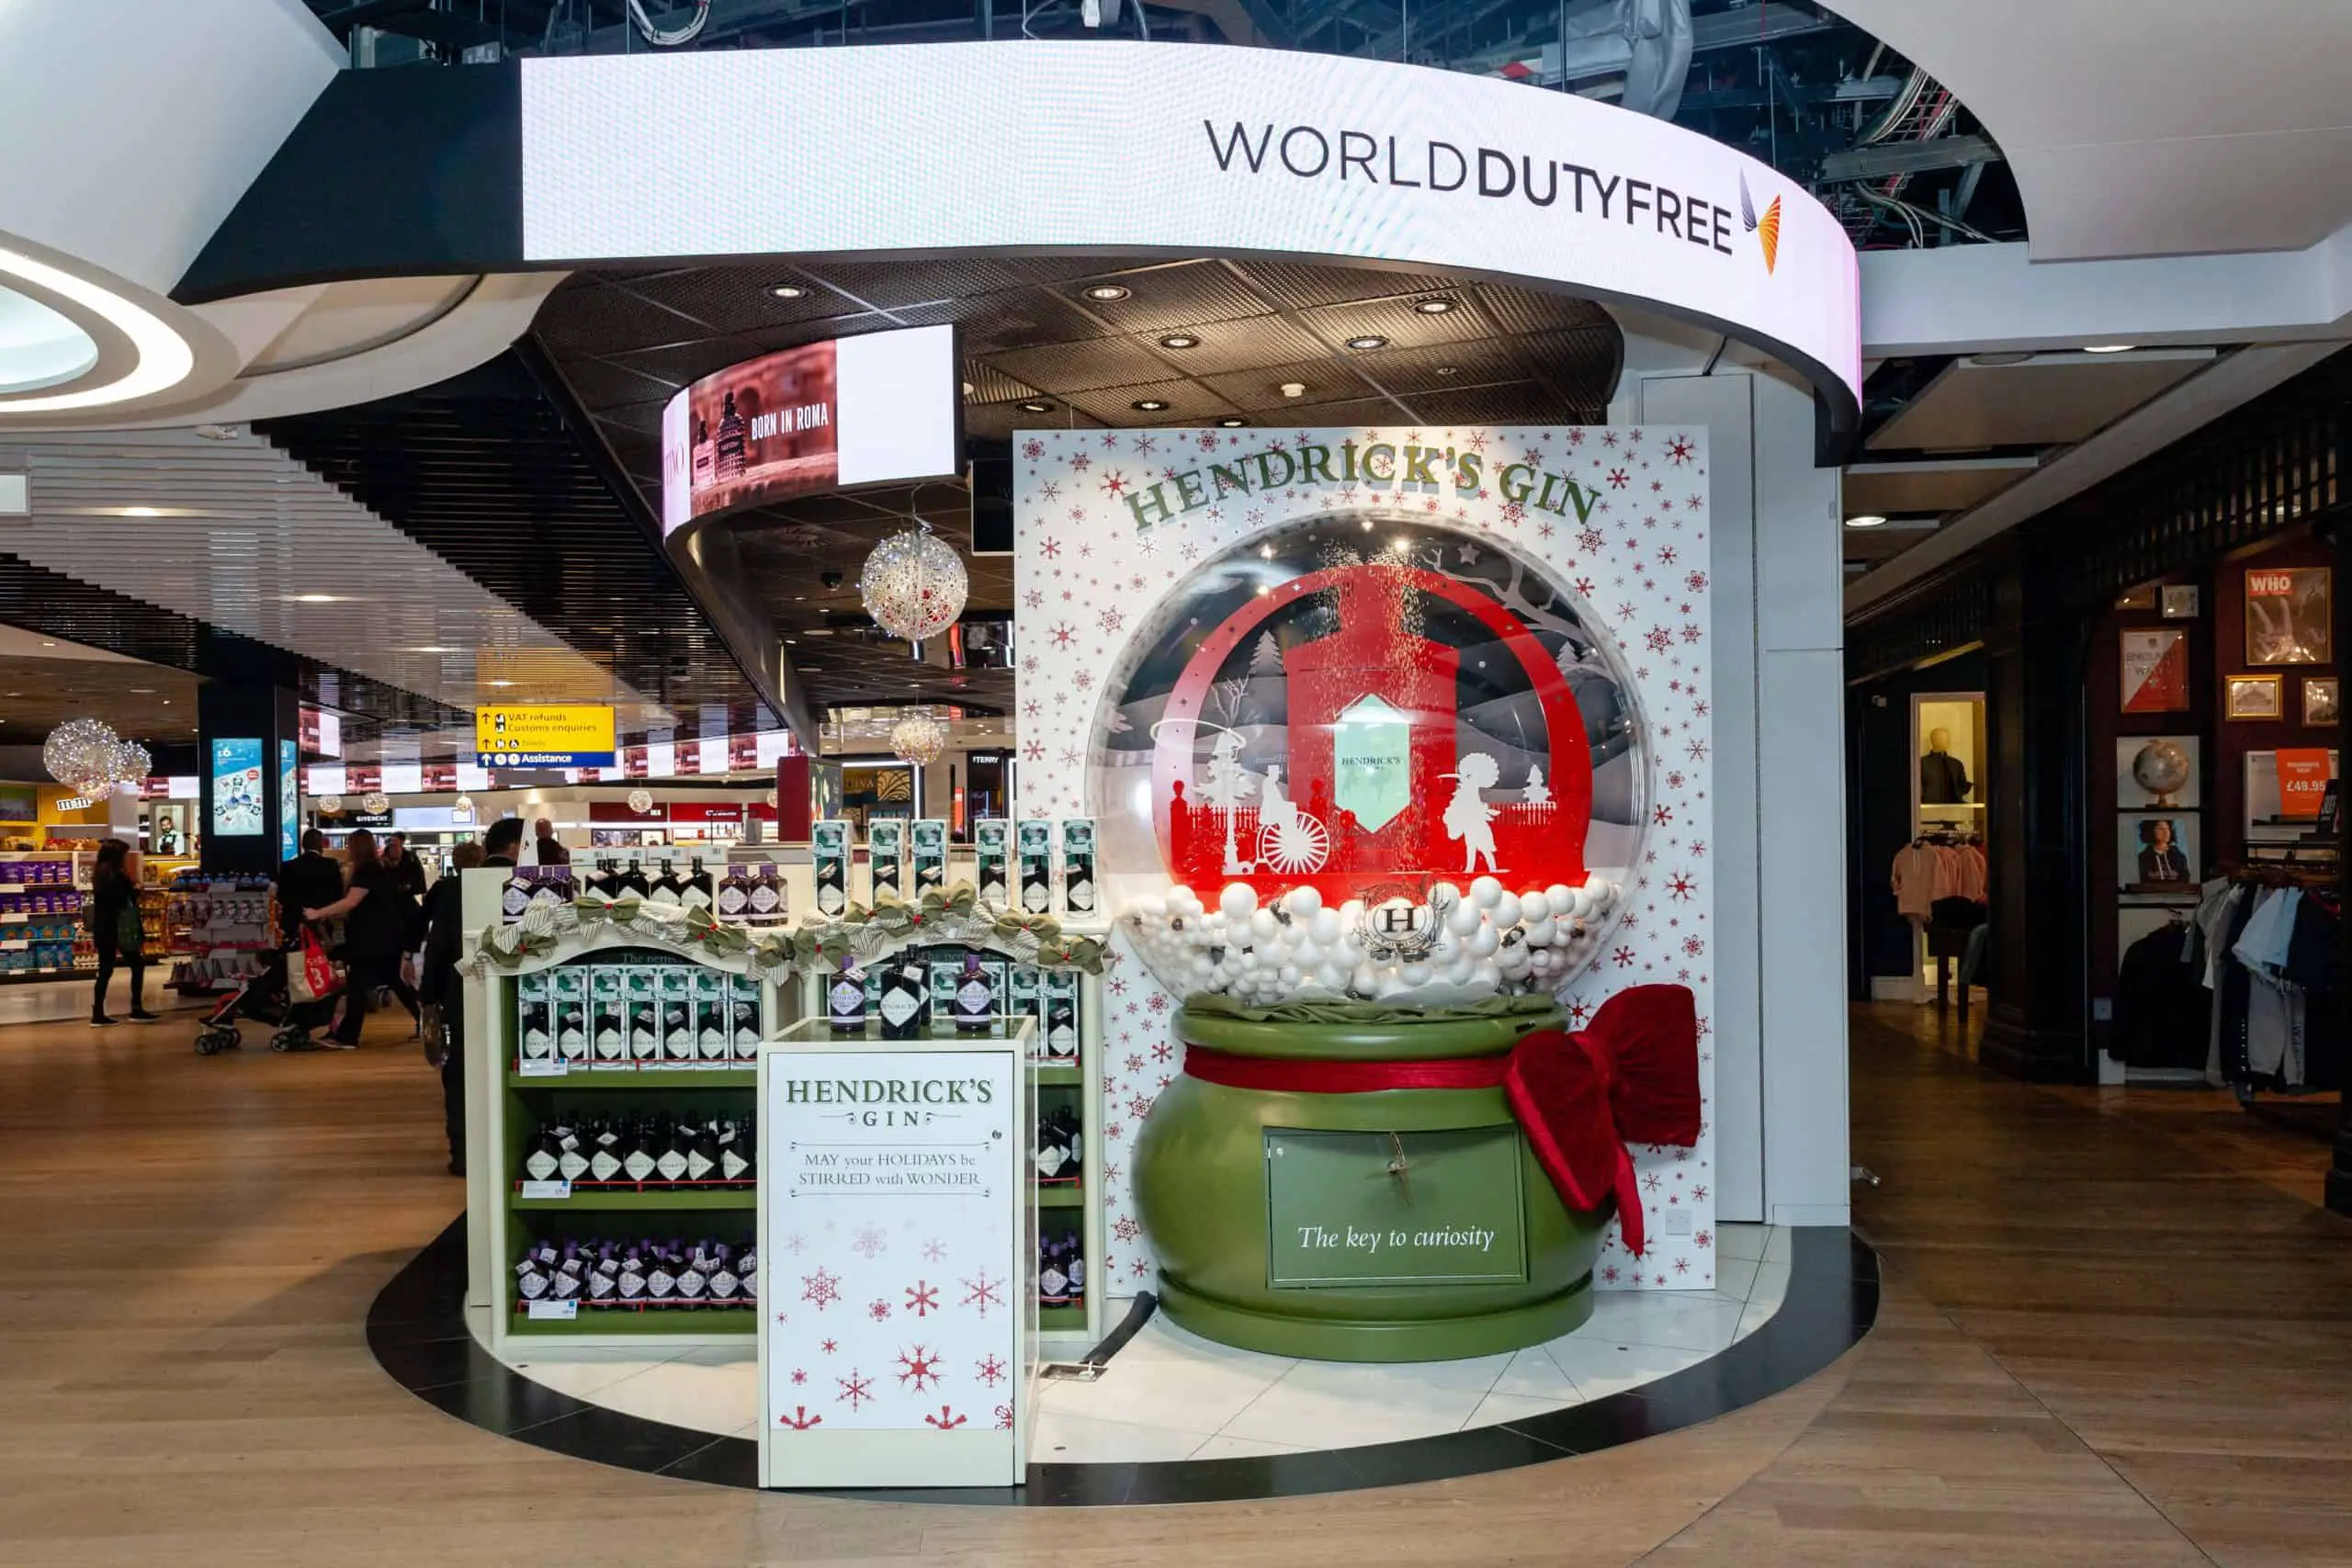 Hendrick’s Gin brings festive joy to passengers with a delightfully unusual snow globe activation in London Heathrow Terminal 3